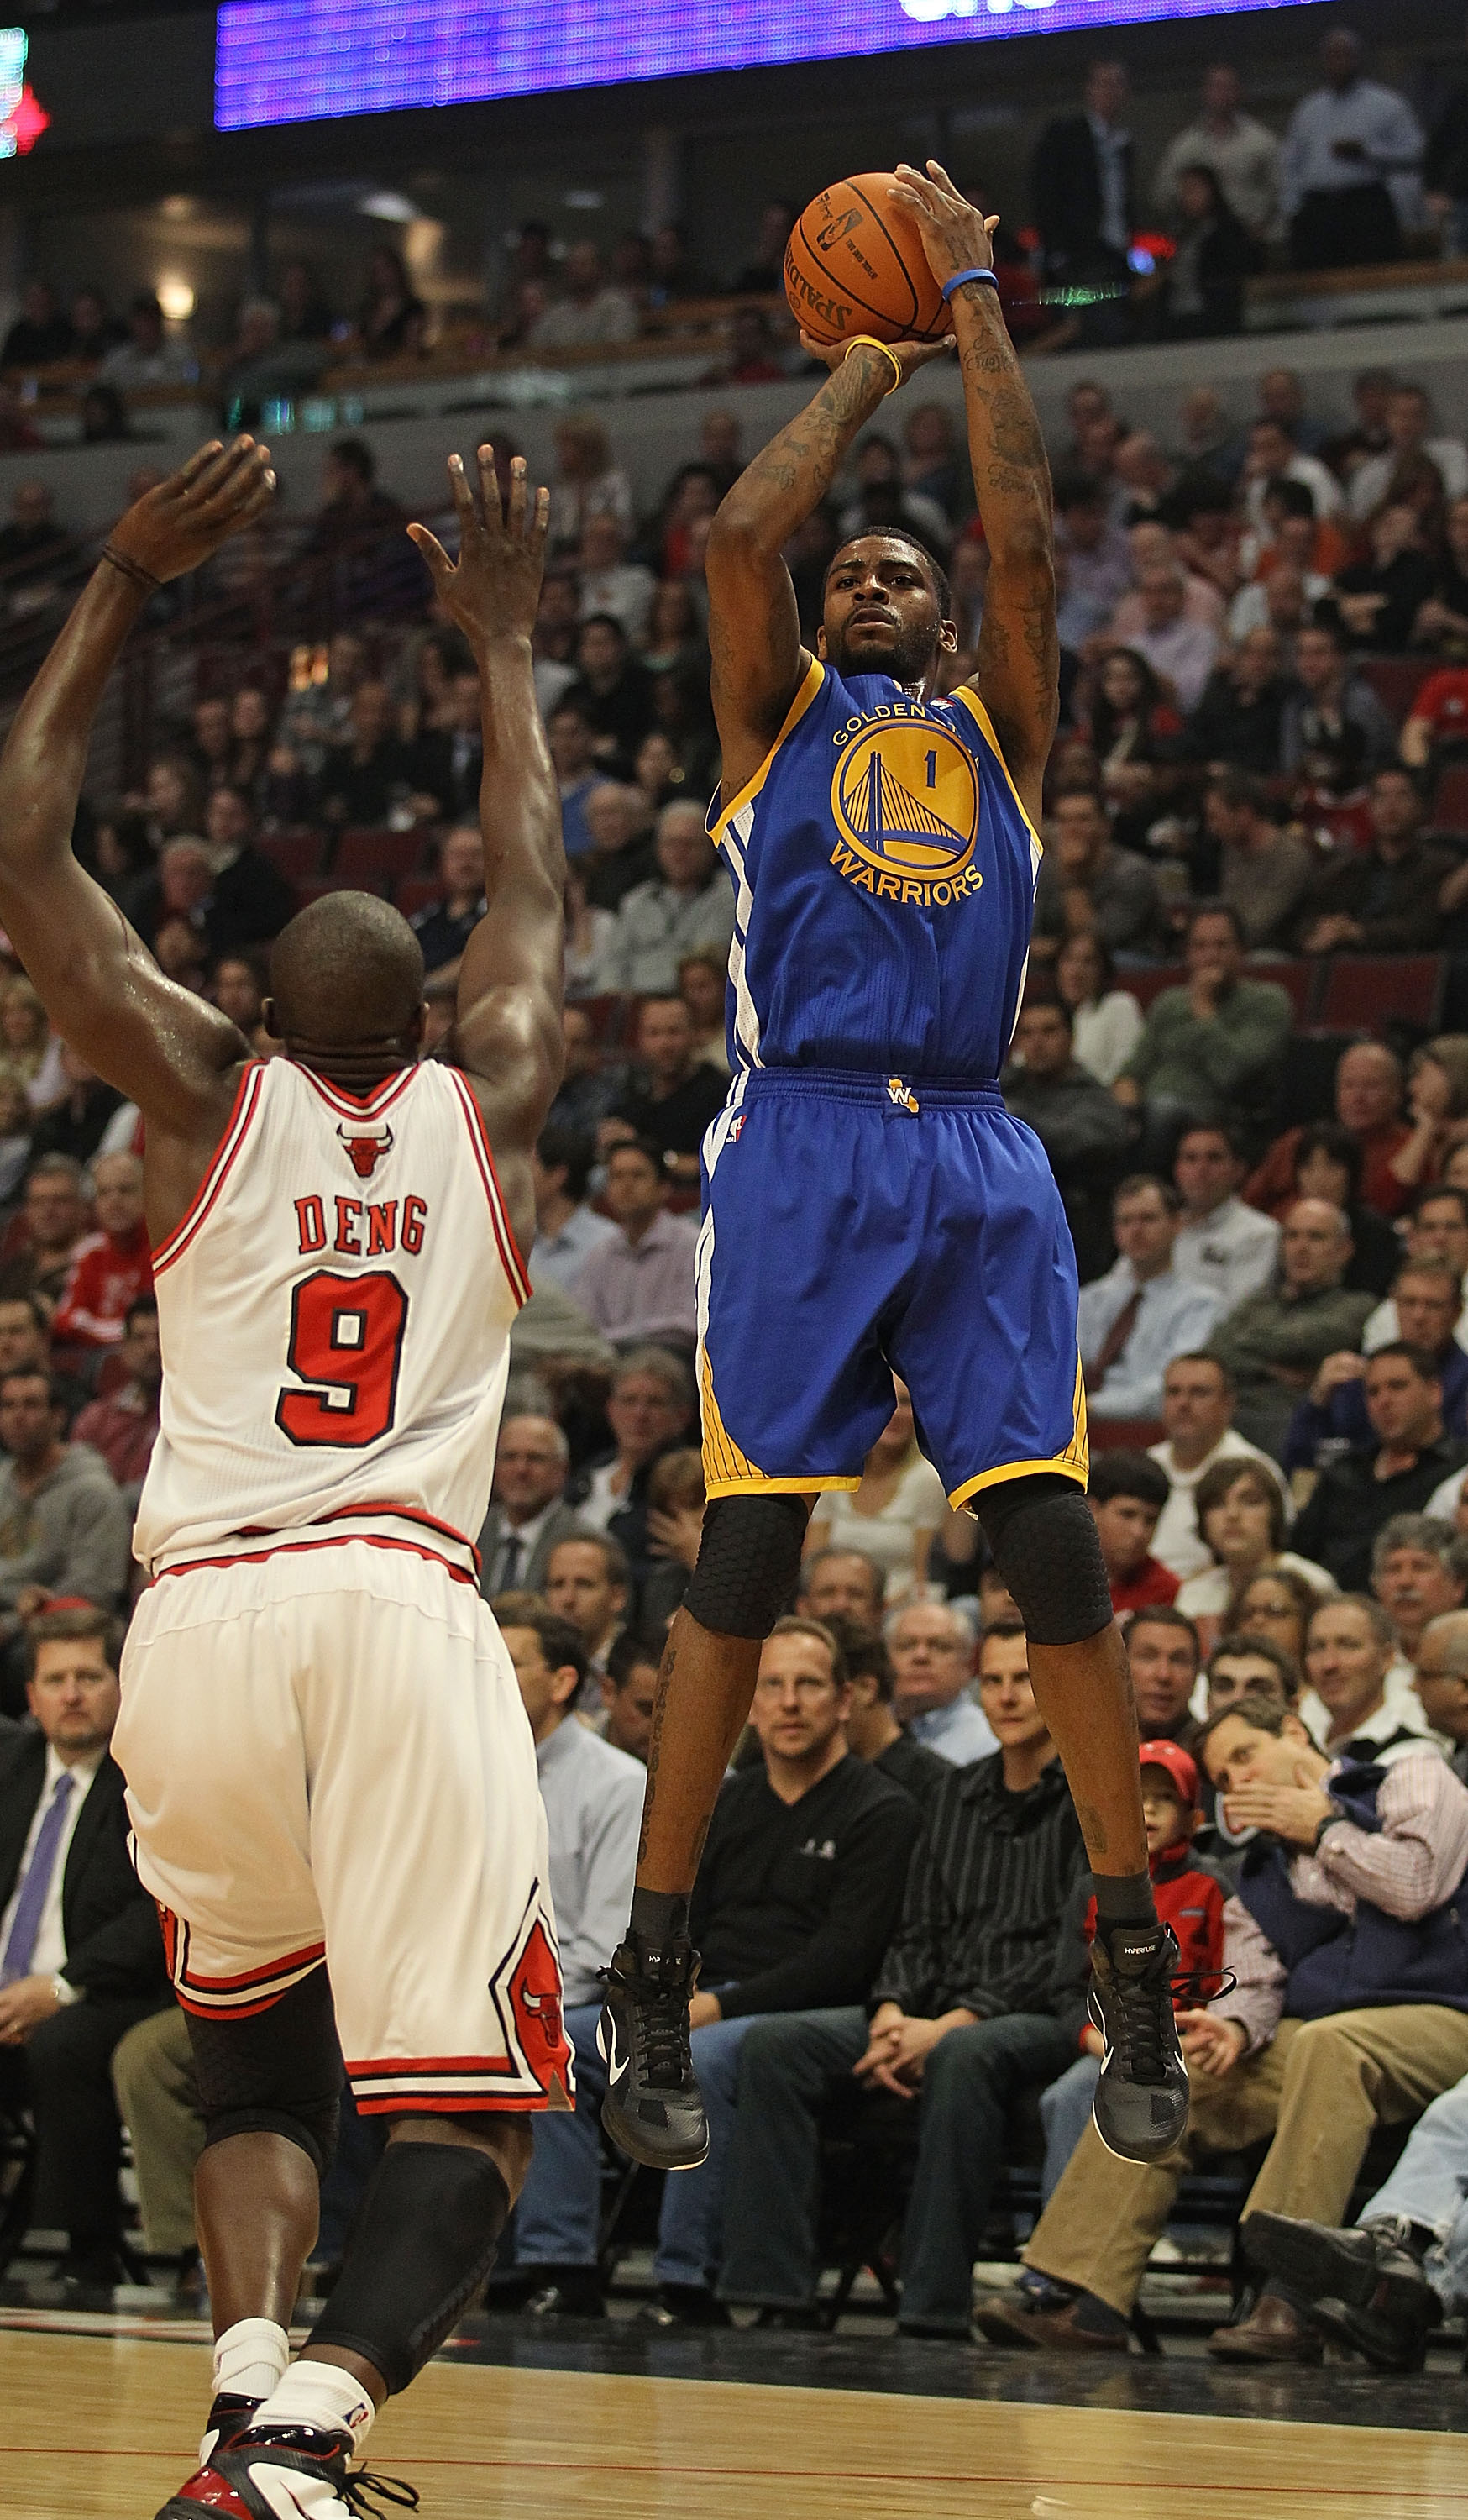 CHICAGO, IL - NOVEMBER 11: Dorell Wright #1 of the Golden State Warriors puts up a shot over Loul Deng #9 of the Chicago Bulls at the United Center on November 11, 2010 in Chicago, Illinois. The Bulls defeated the Warriors 120-90. NOTE TO USER: User expre